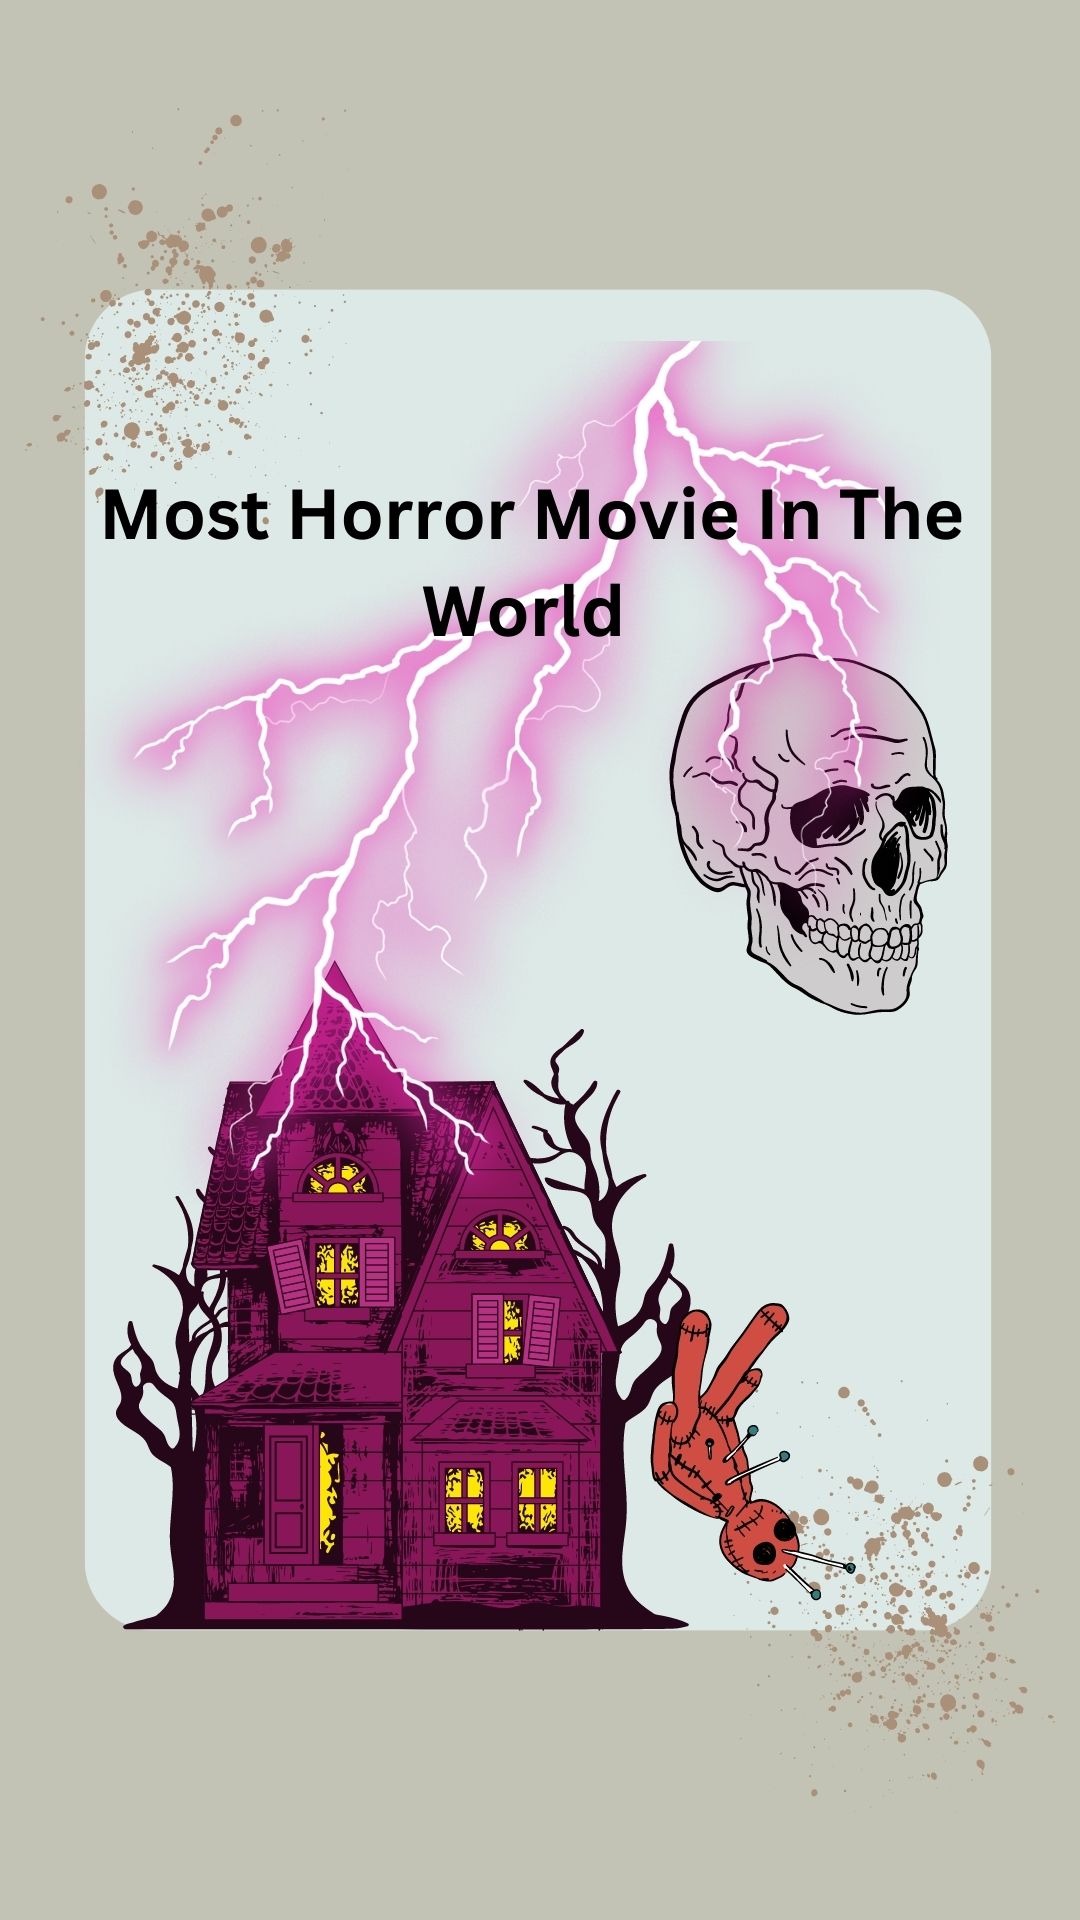 Most Horror Movie In The World